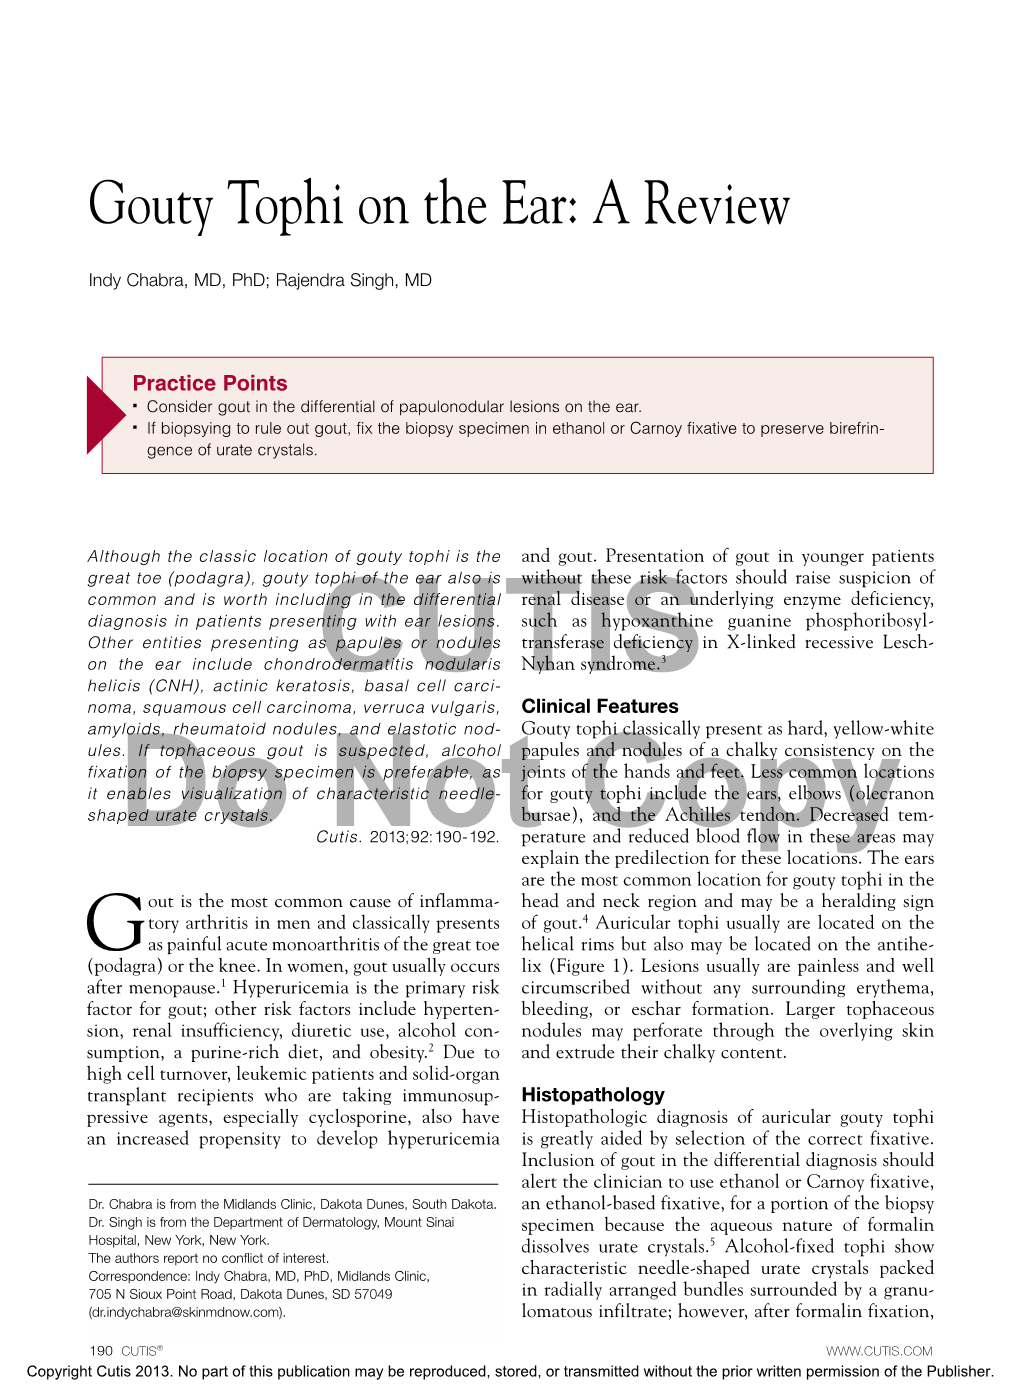 Gouty Tophi on the Ear: a Review